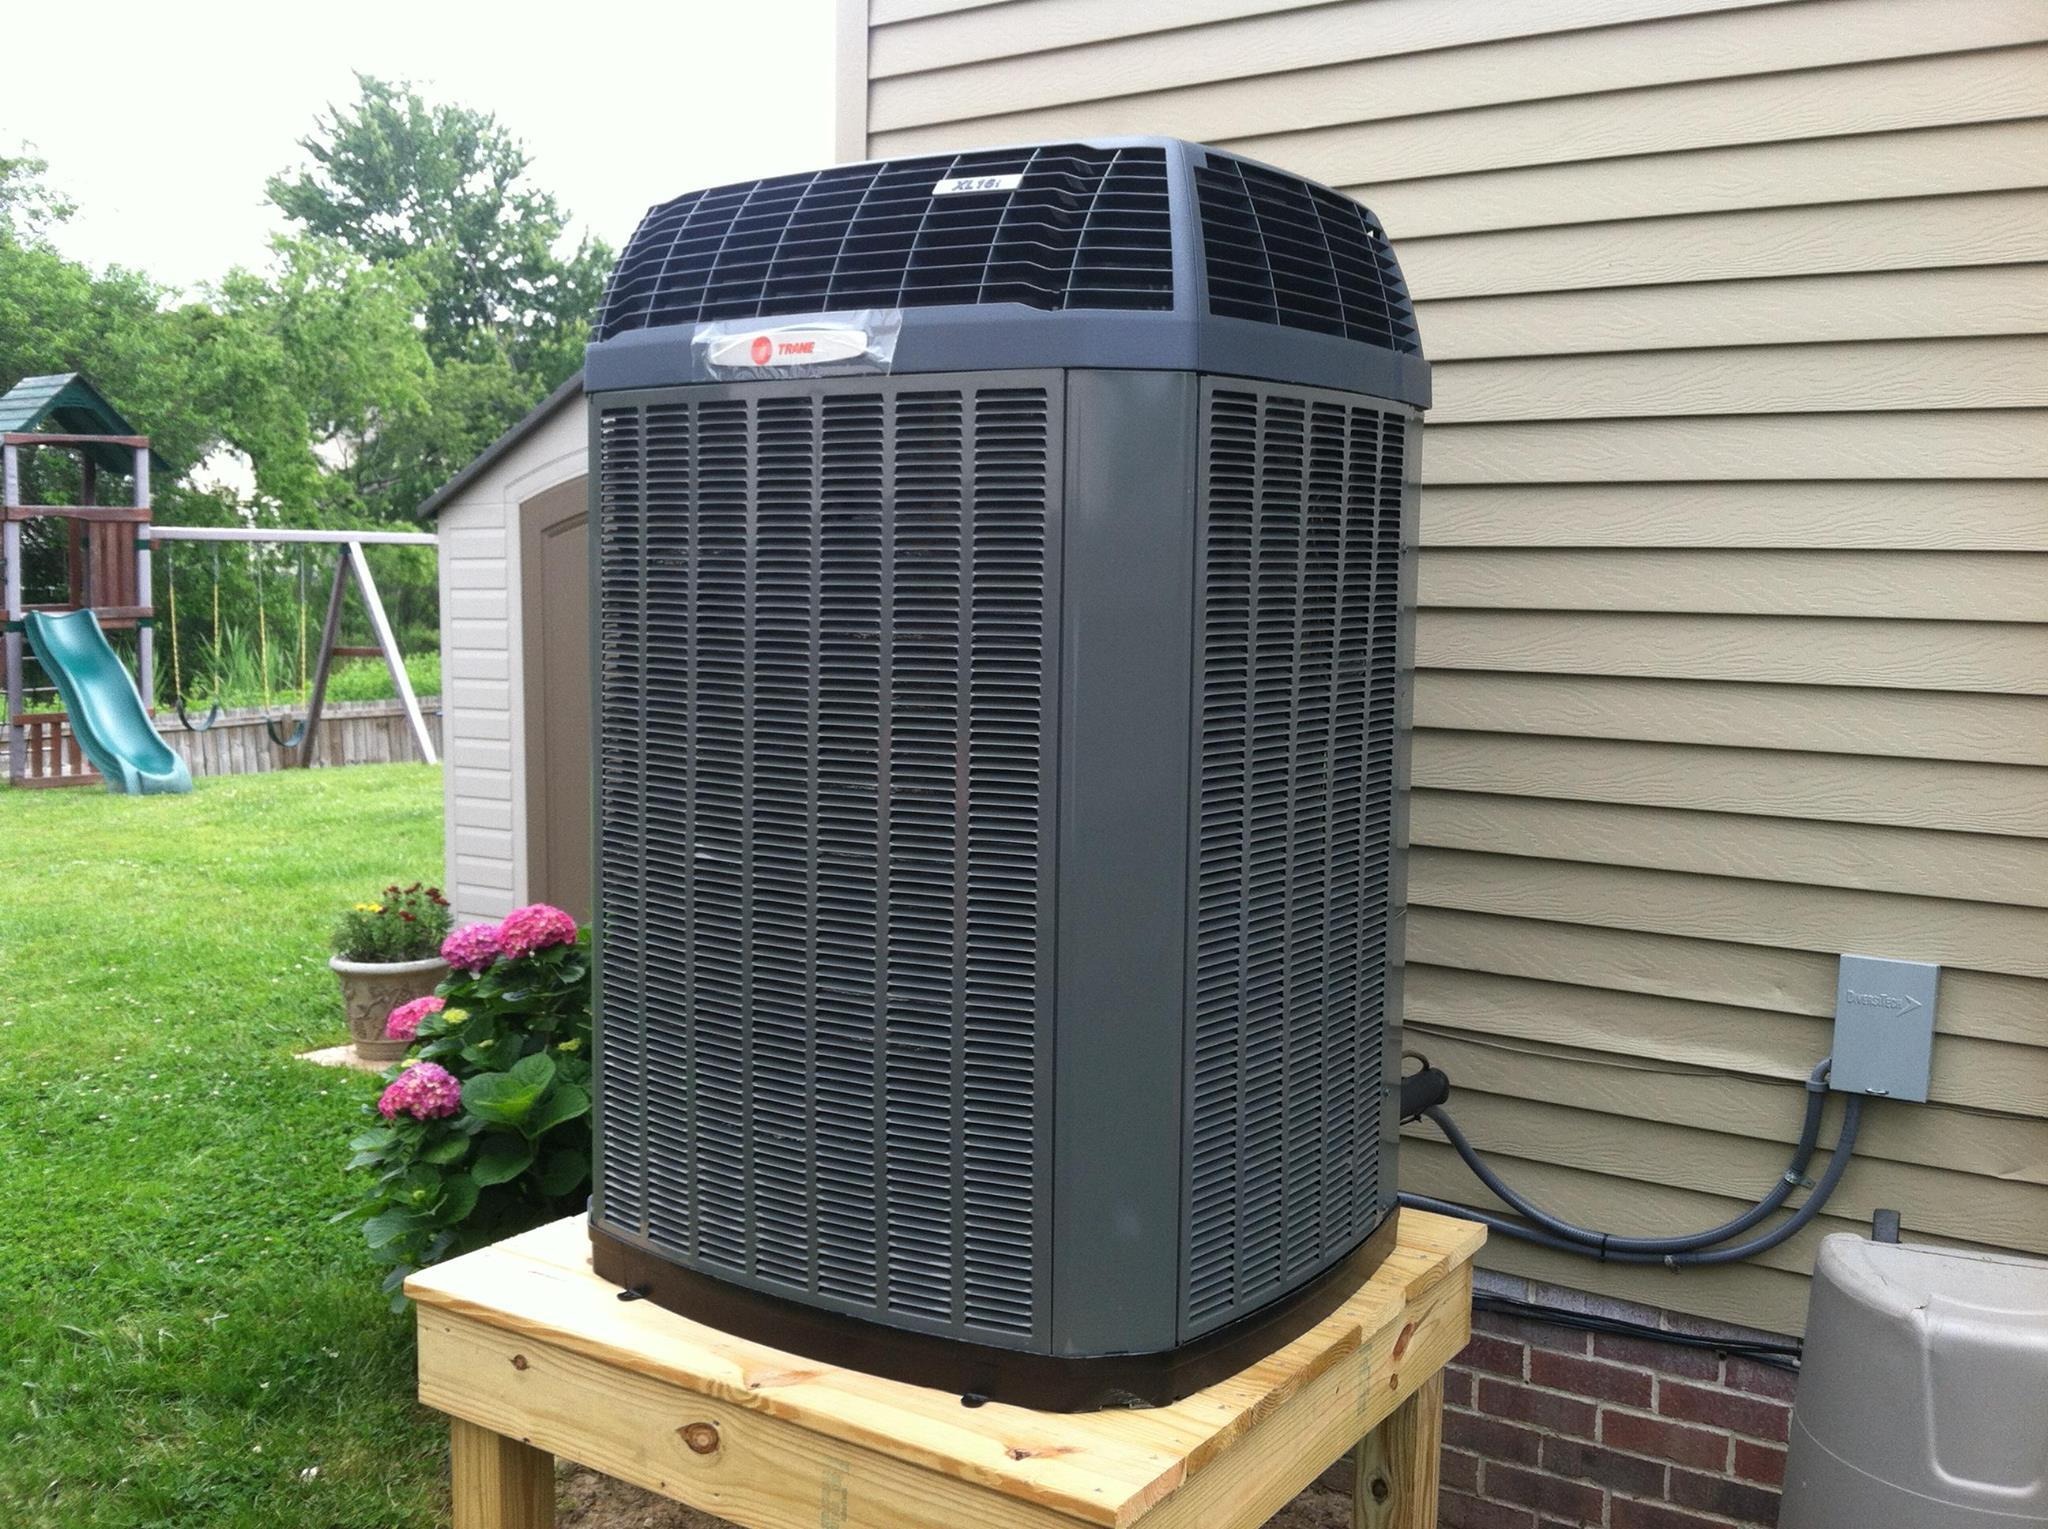 Air Conditioning Services in Rockwall, Air Conditioning Services in Rockwall, TX